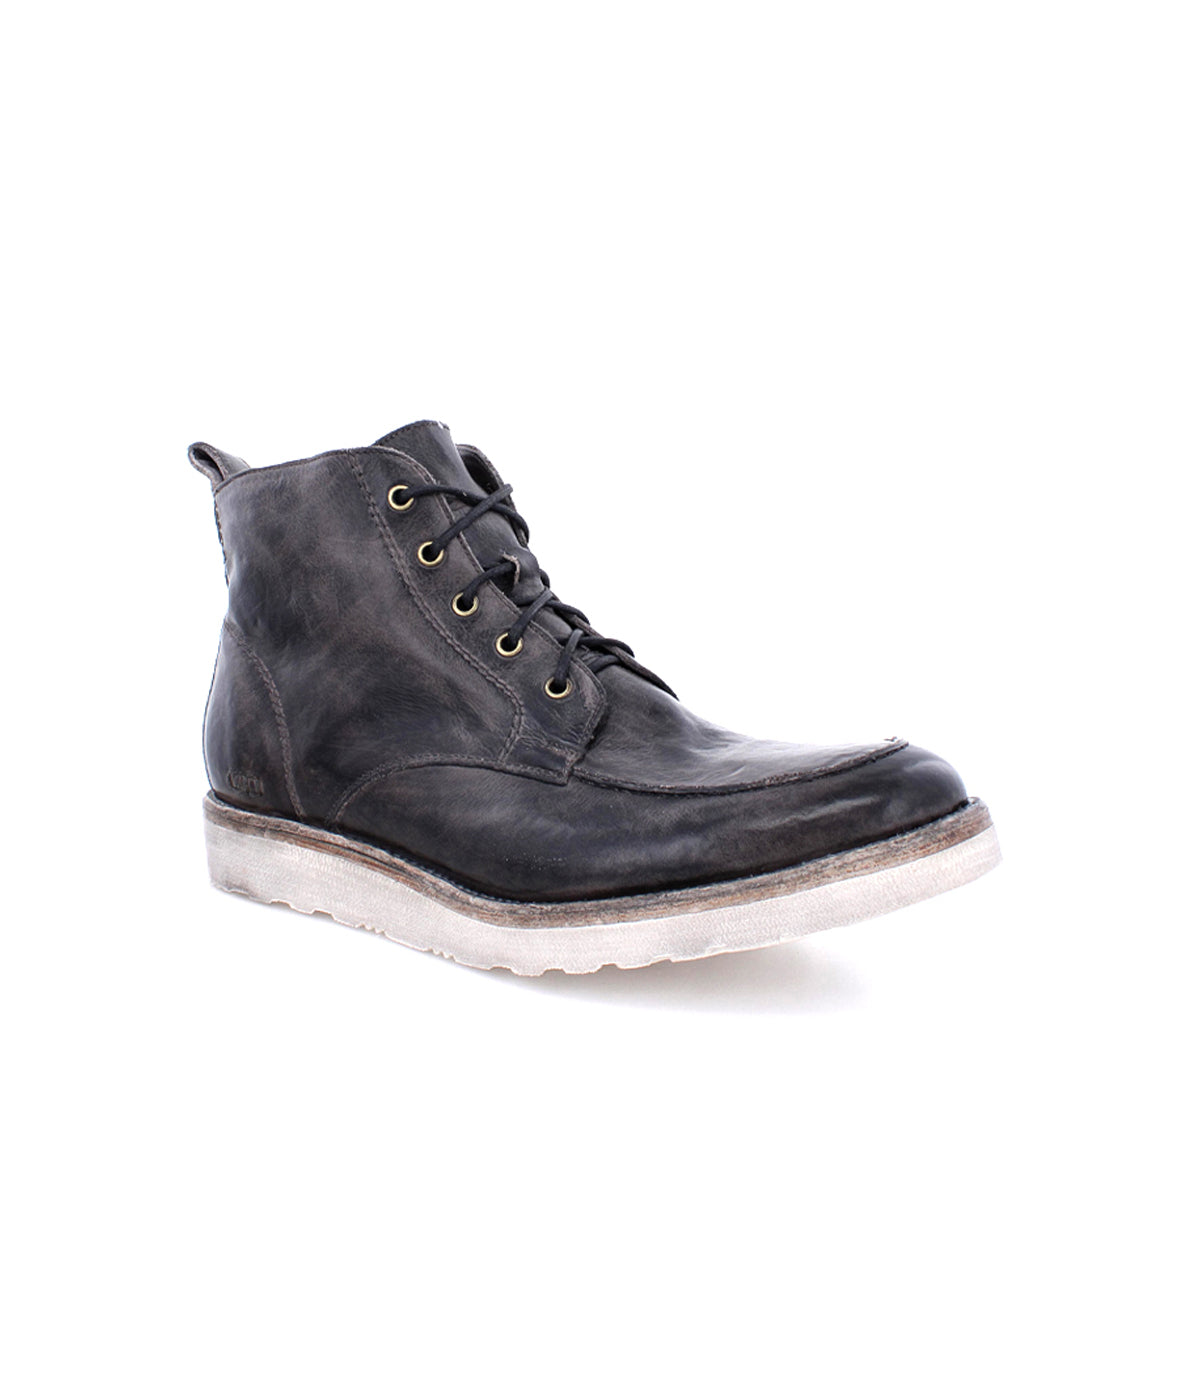 Black leather lace-up Lincoln work boot by Bed Stu with a worn look on a white background.